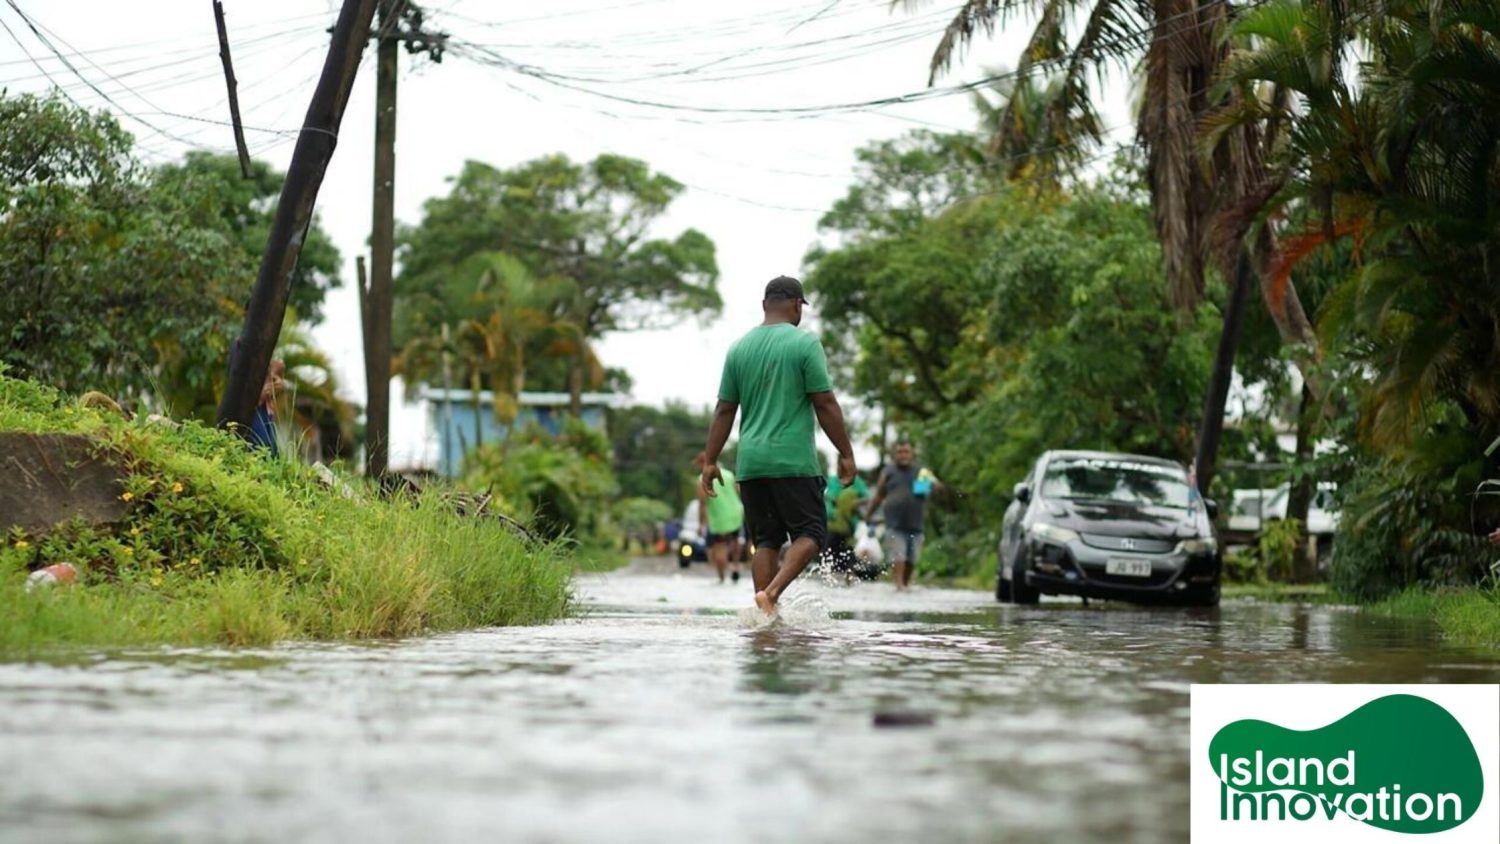 Pacific Island countries fight to ensure future before rising sea levels swallow them up